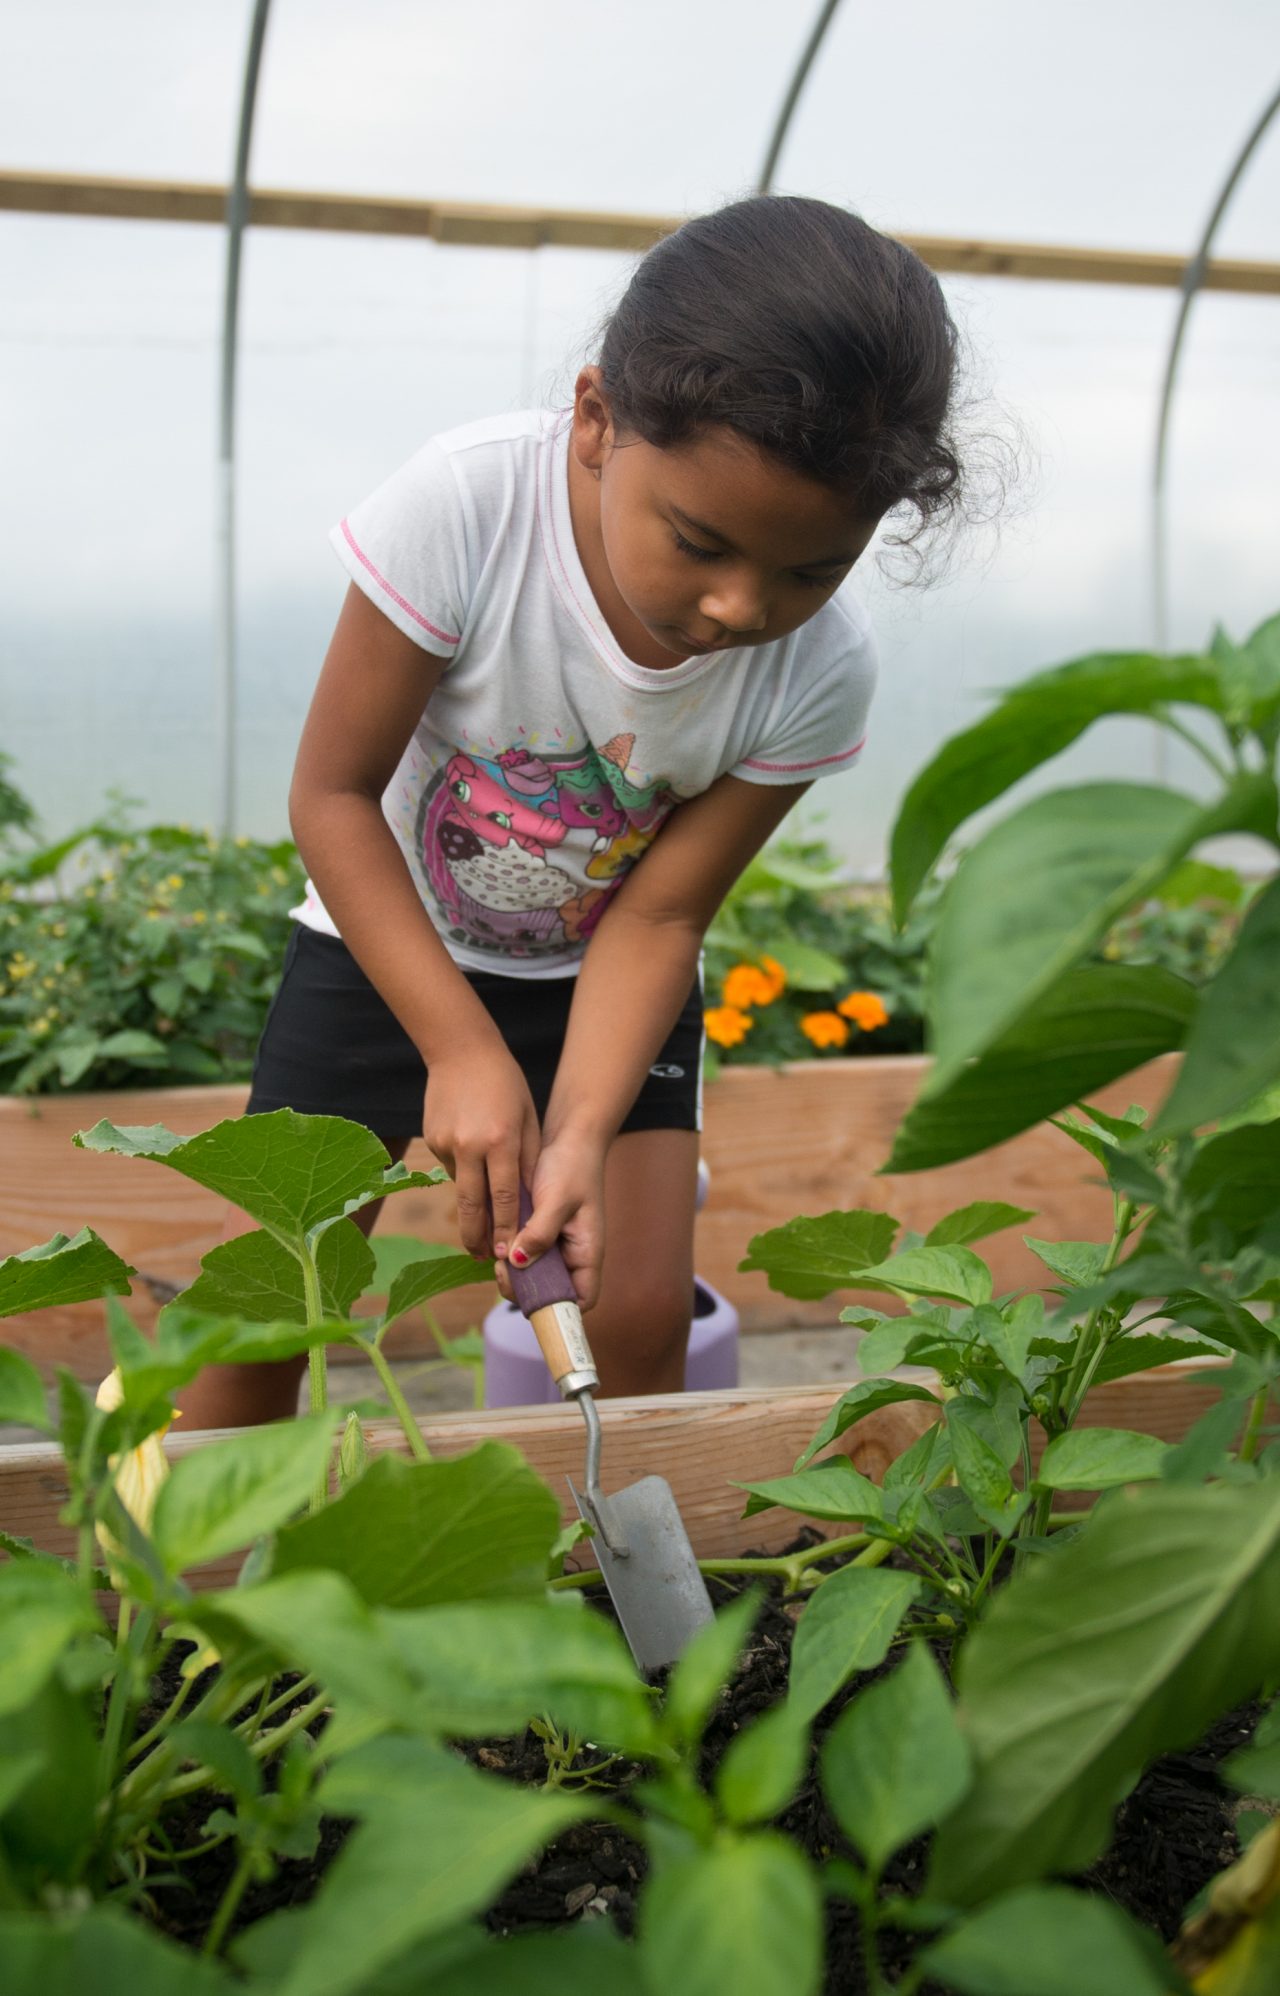 A young girl tending plants in a greenhouse.